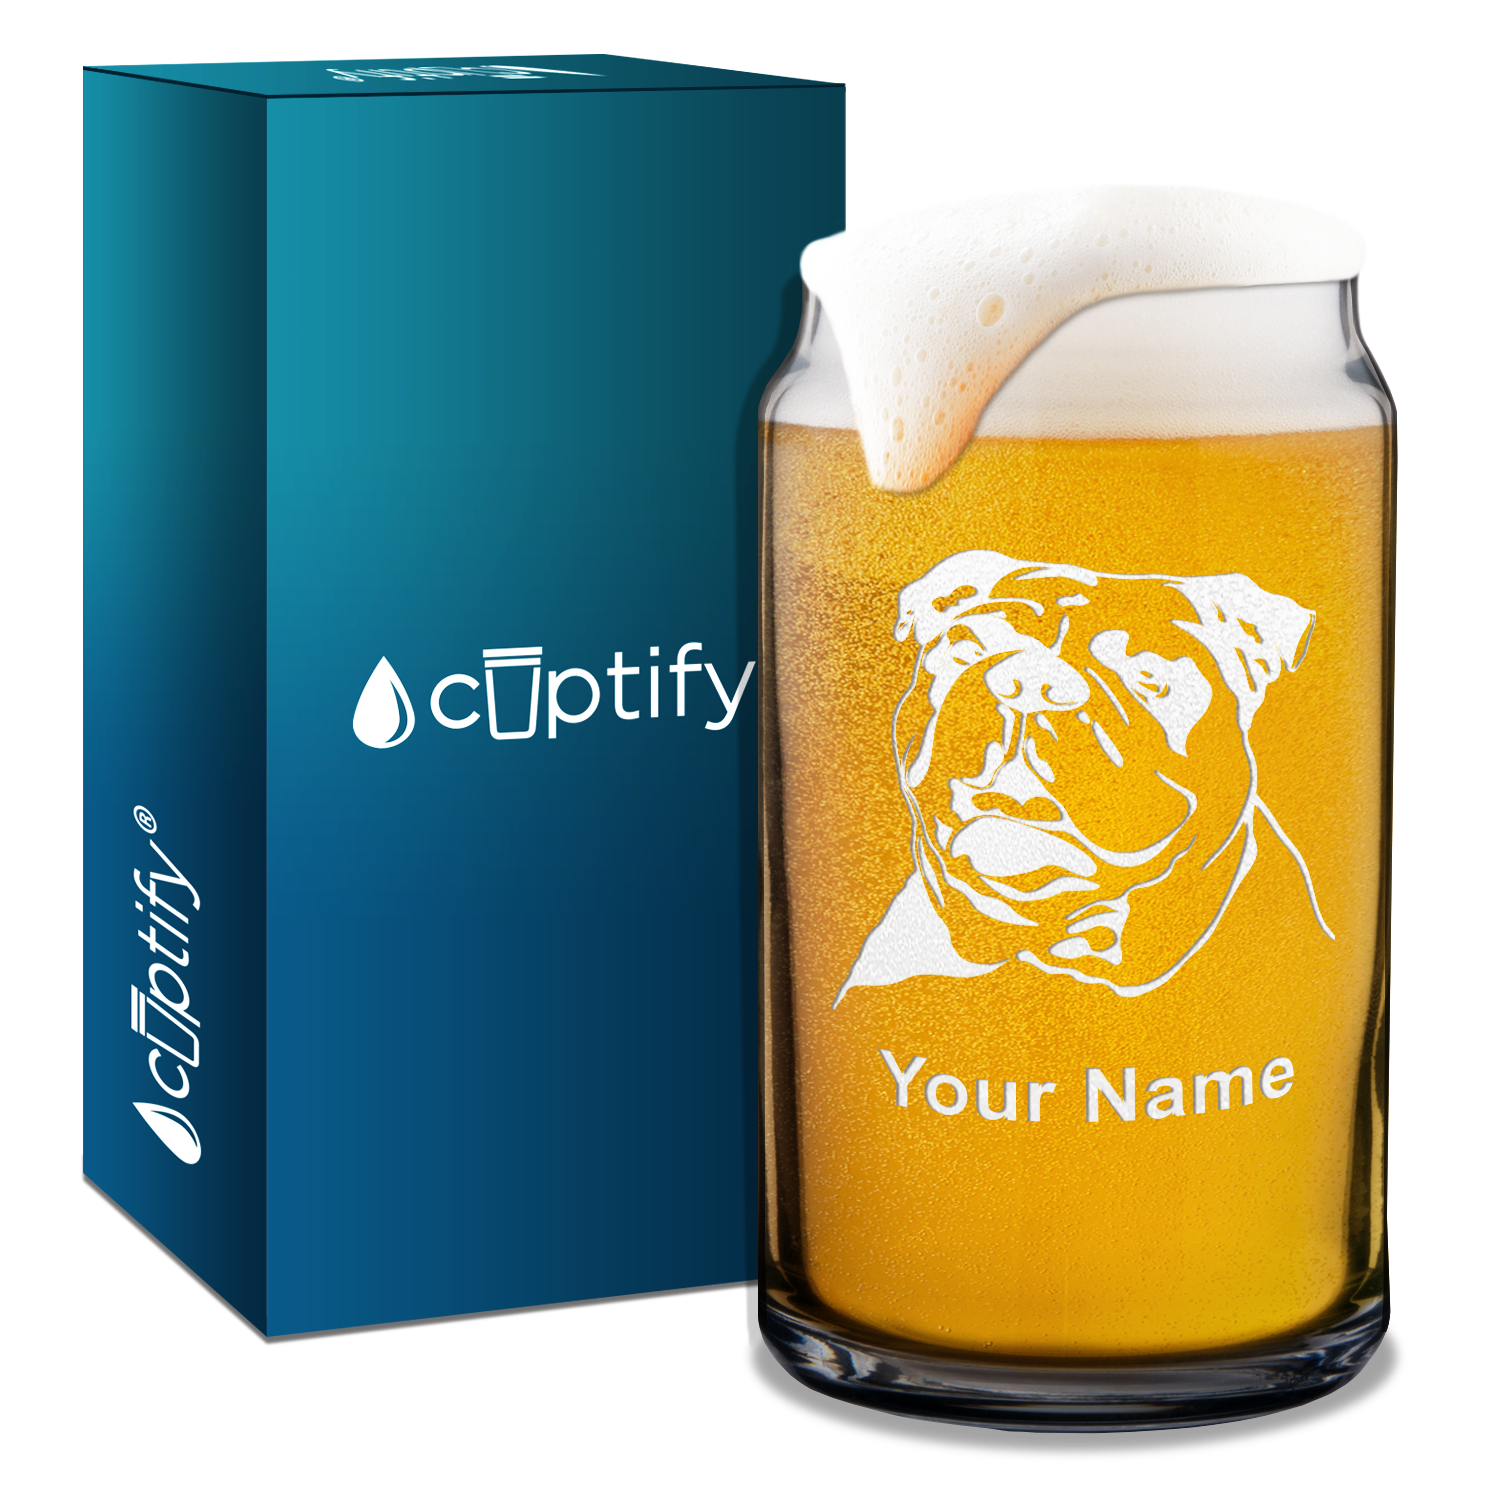 Personalized Bulldog Head 16 oz Beer Glass Can